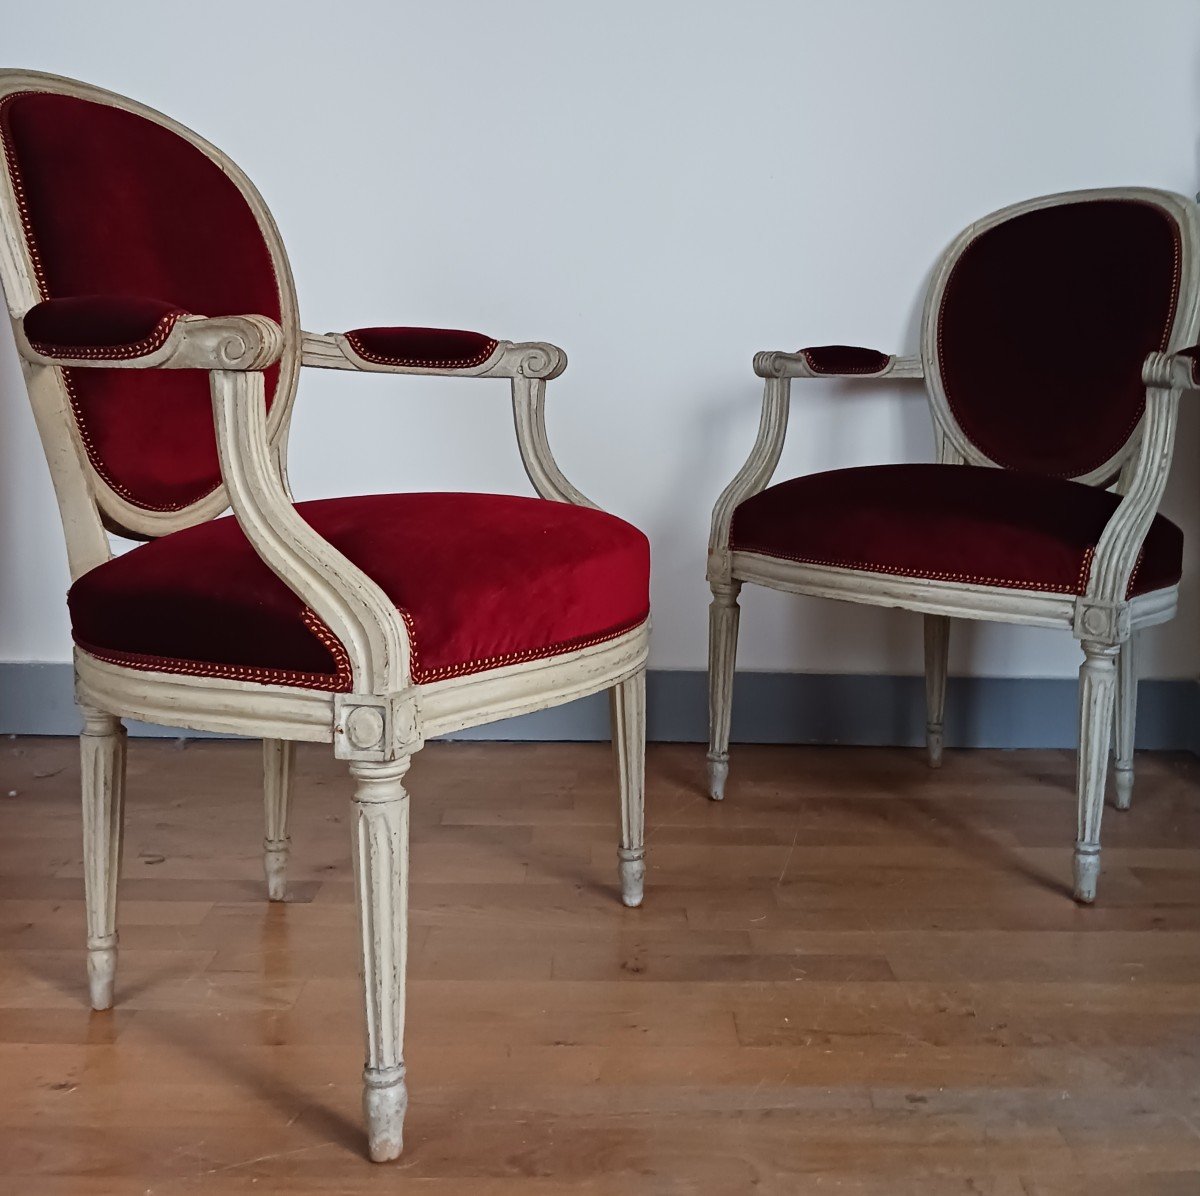 Claude Gorgu, Master In 1770 - Pair Of Cabriolet Armchairs - Restored - Mottled Velvet - Inventory Number-photo-2